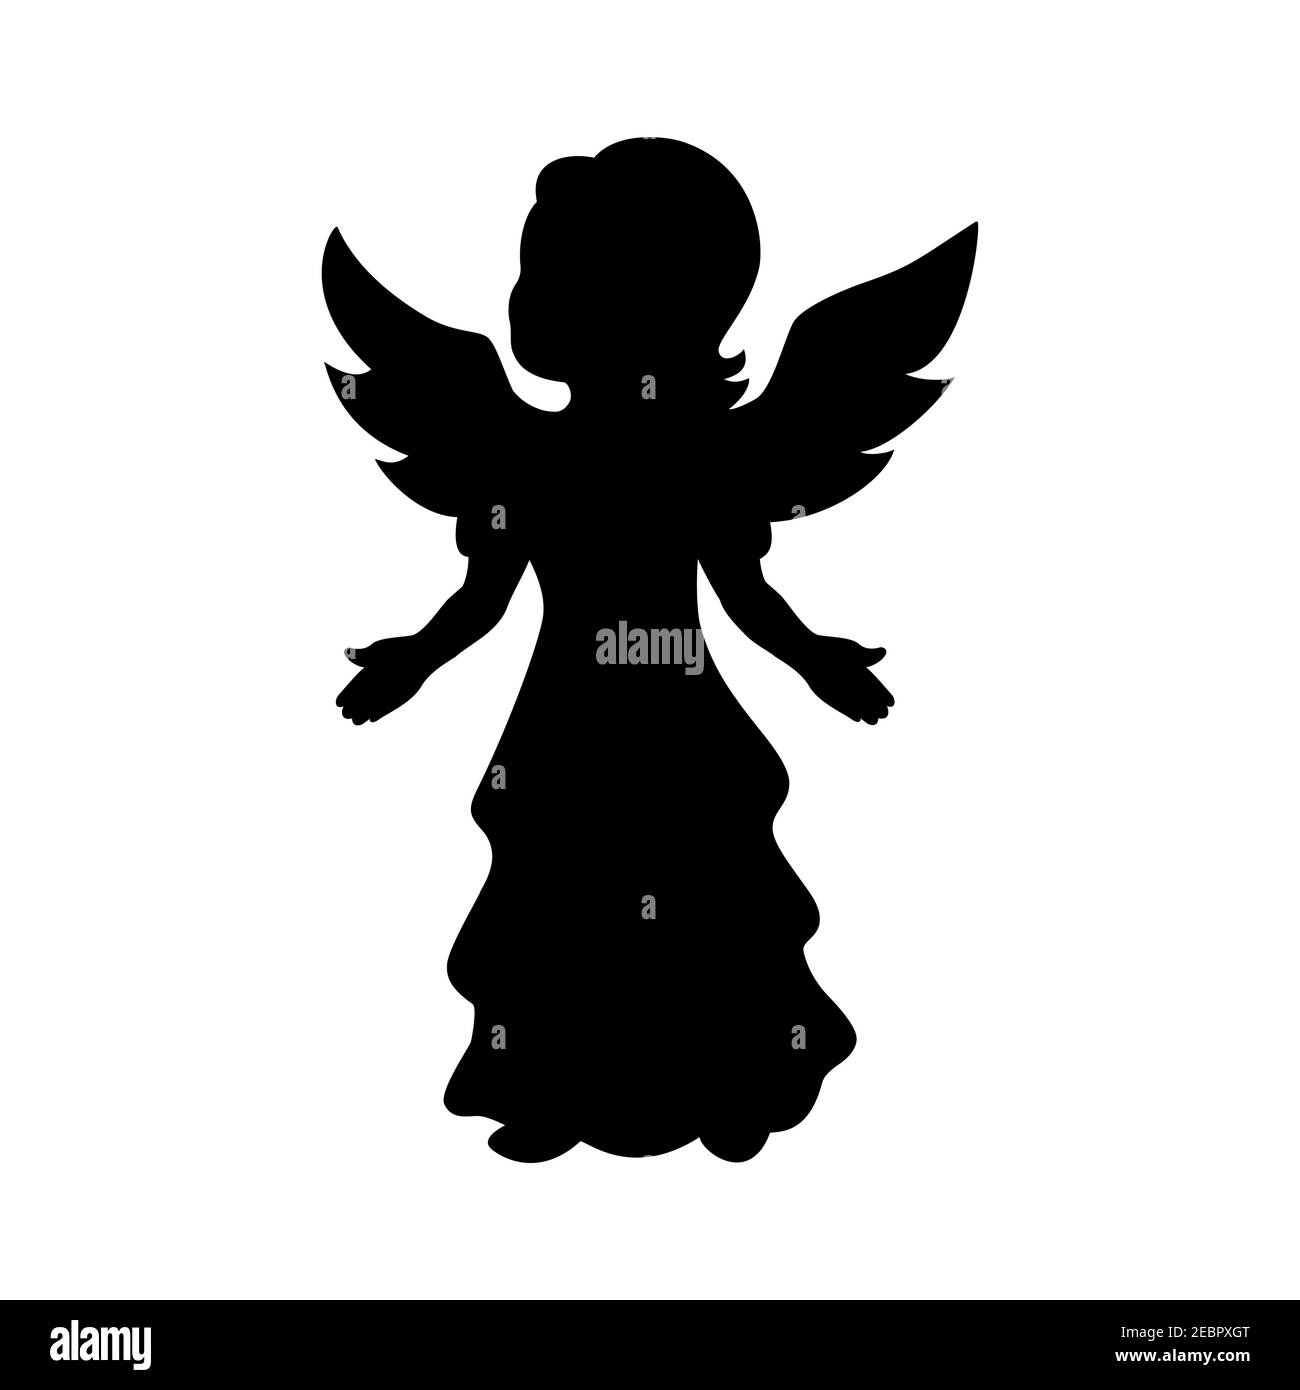 Silhouette angel girl with wings. Vector illustration of a black silhouette of a little girl with angel wings isolated on a white background. Stock Vector